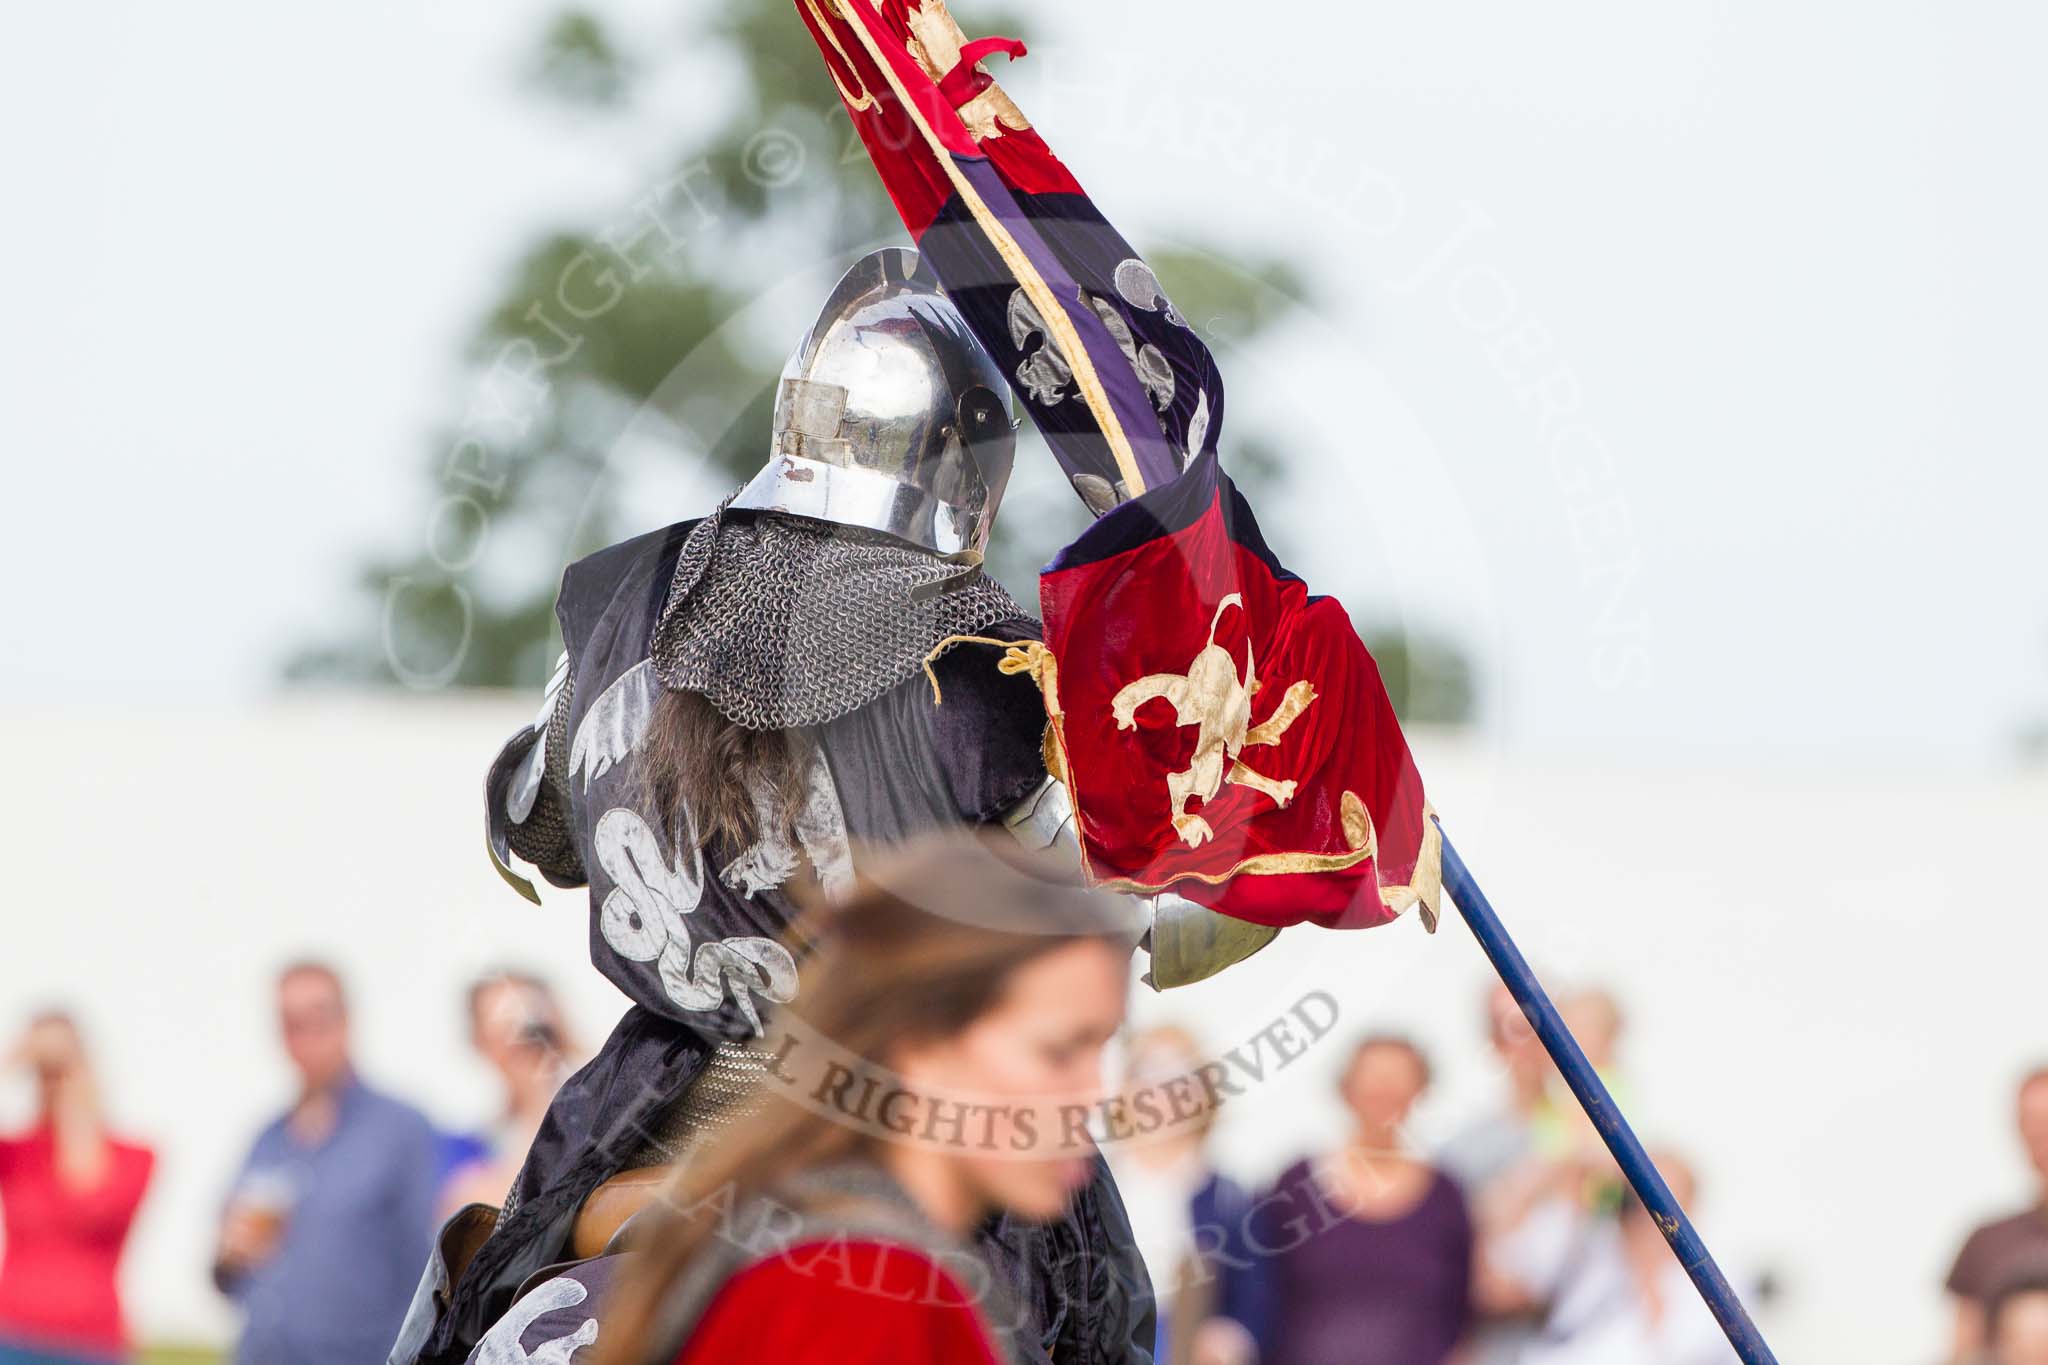 DBPC Polo in the Park 2013 - jousting display by the Knights of Middle England.
Dallas Burston Polo Club, ,
Southam,
Warwickshire,
United Kingdom,
on 01 September 2013 at 15:23, image #462